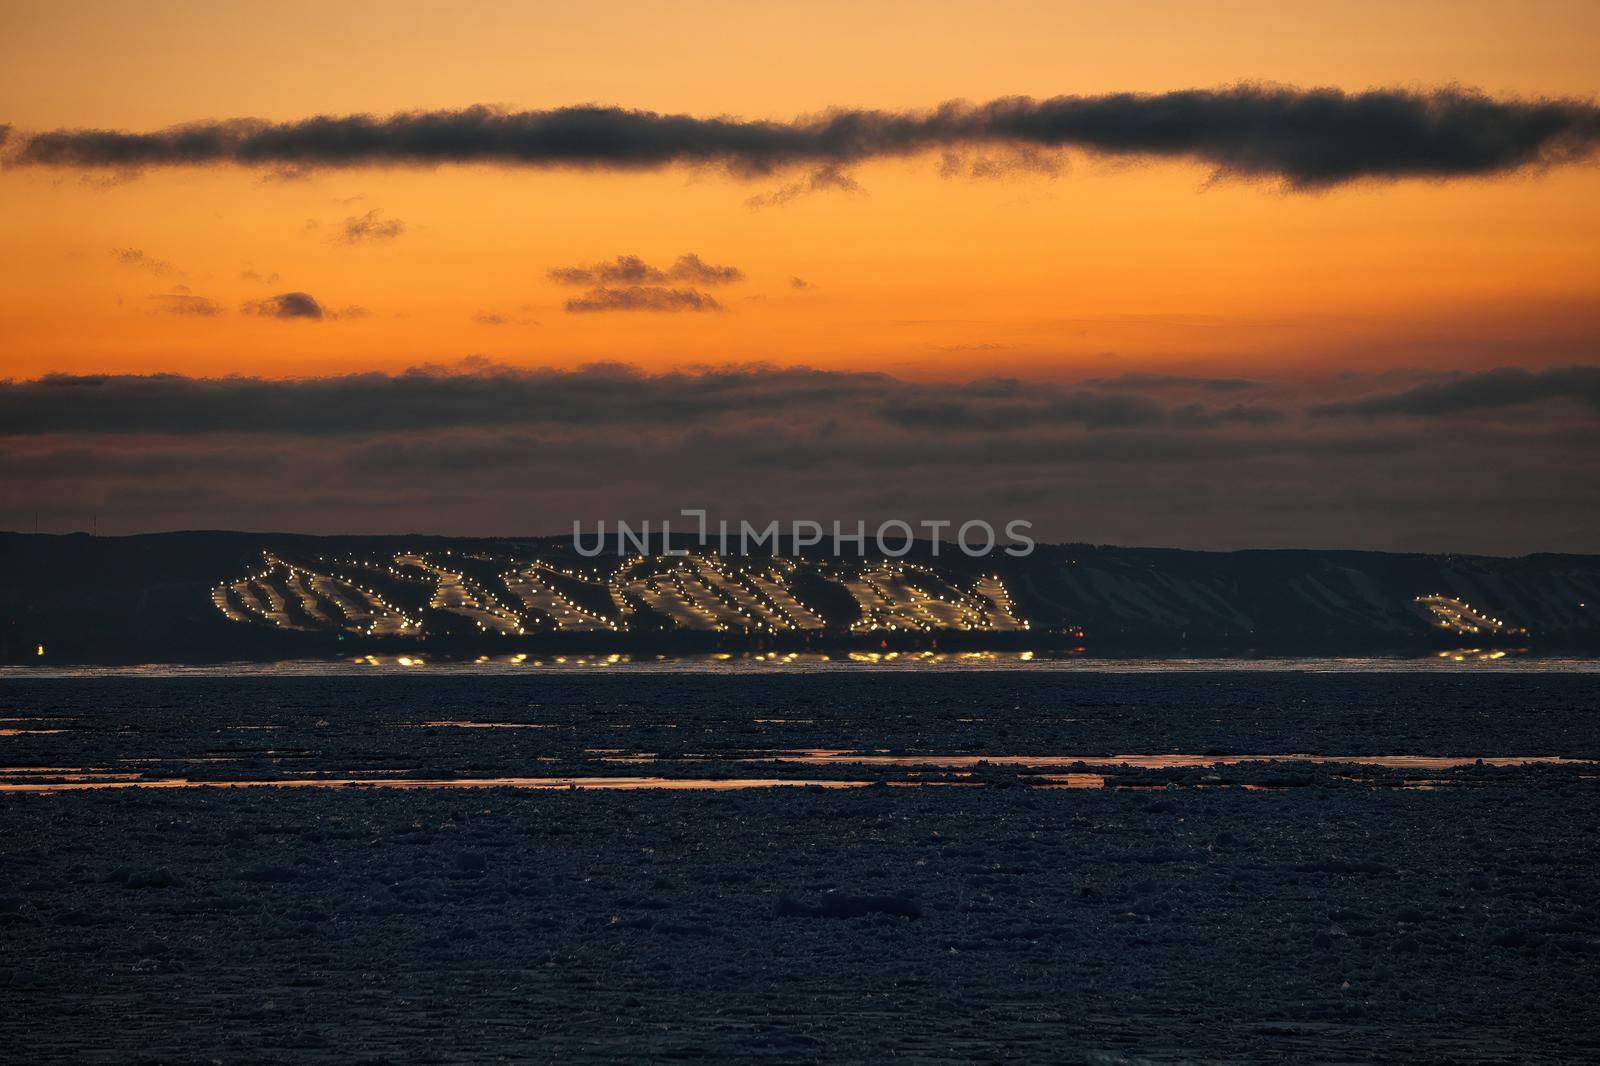 After Sunset Twilight View of Collingwood and Blue Mountain Ski Hills Across Georgian Bay in Winter by markvandam